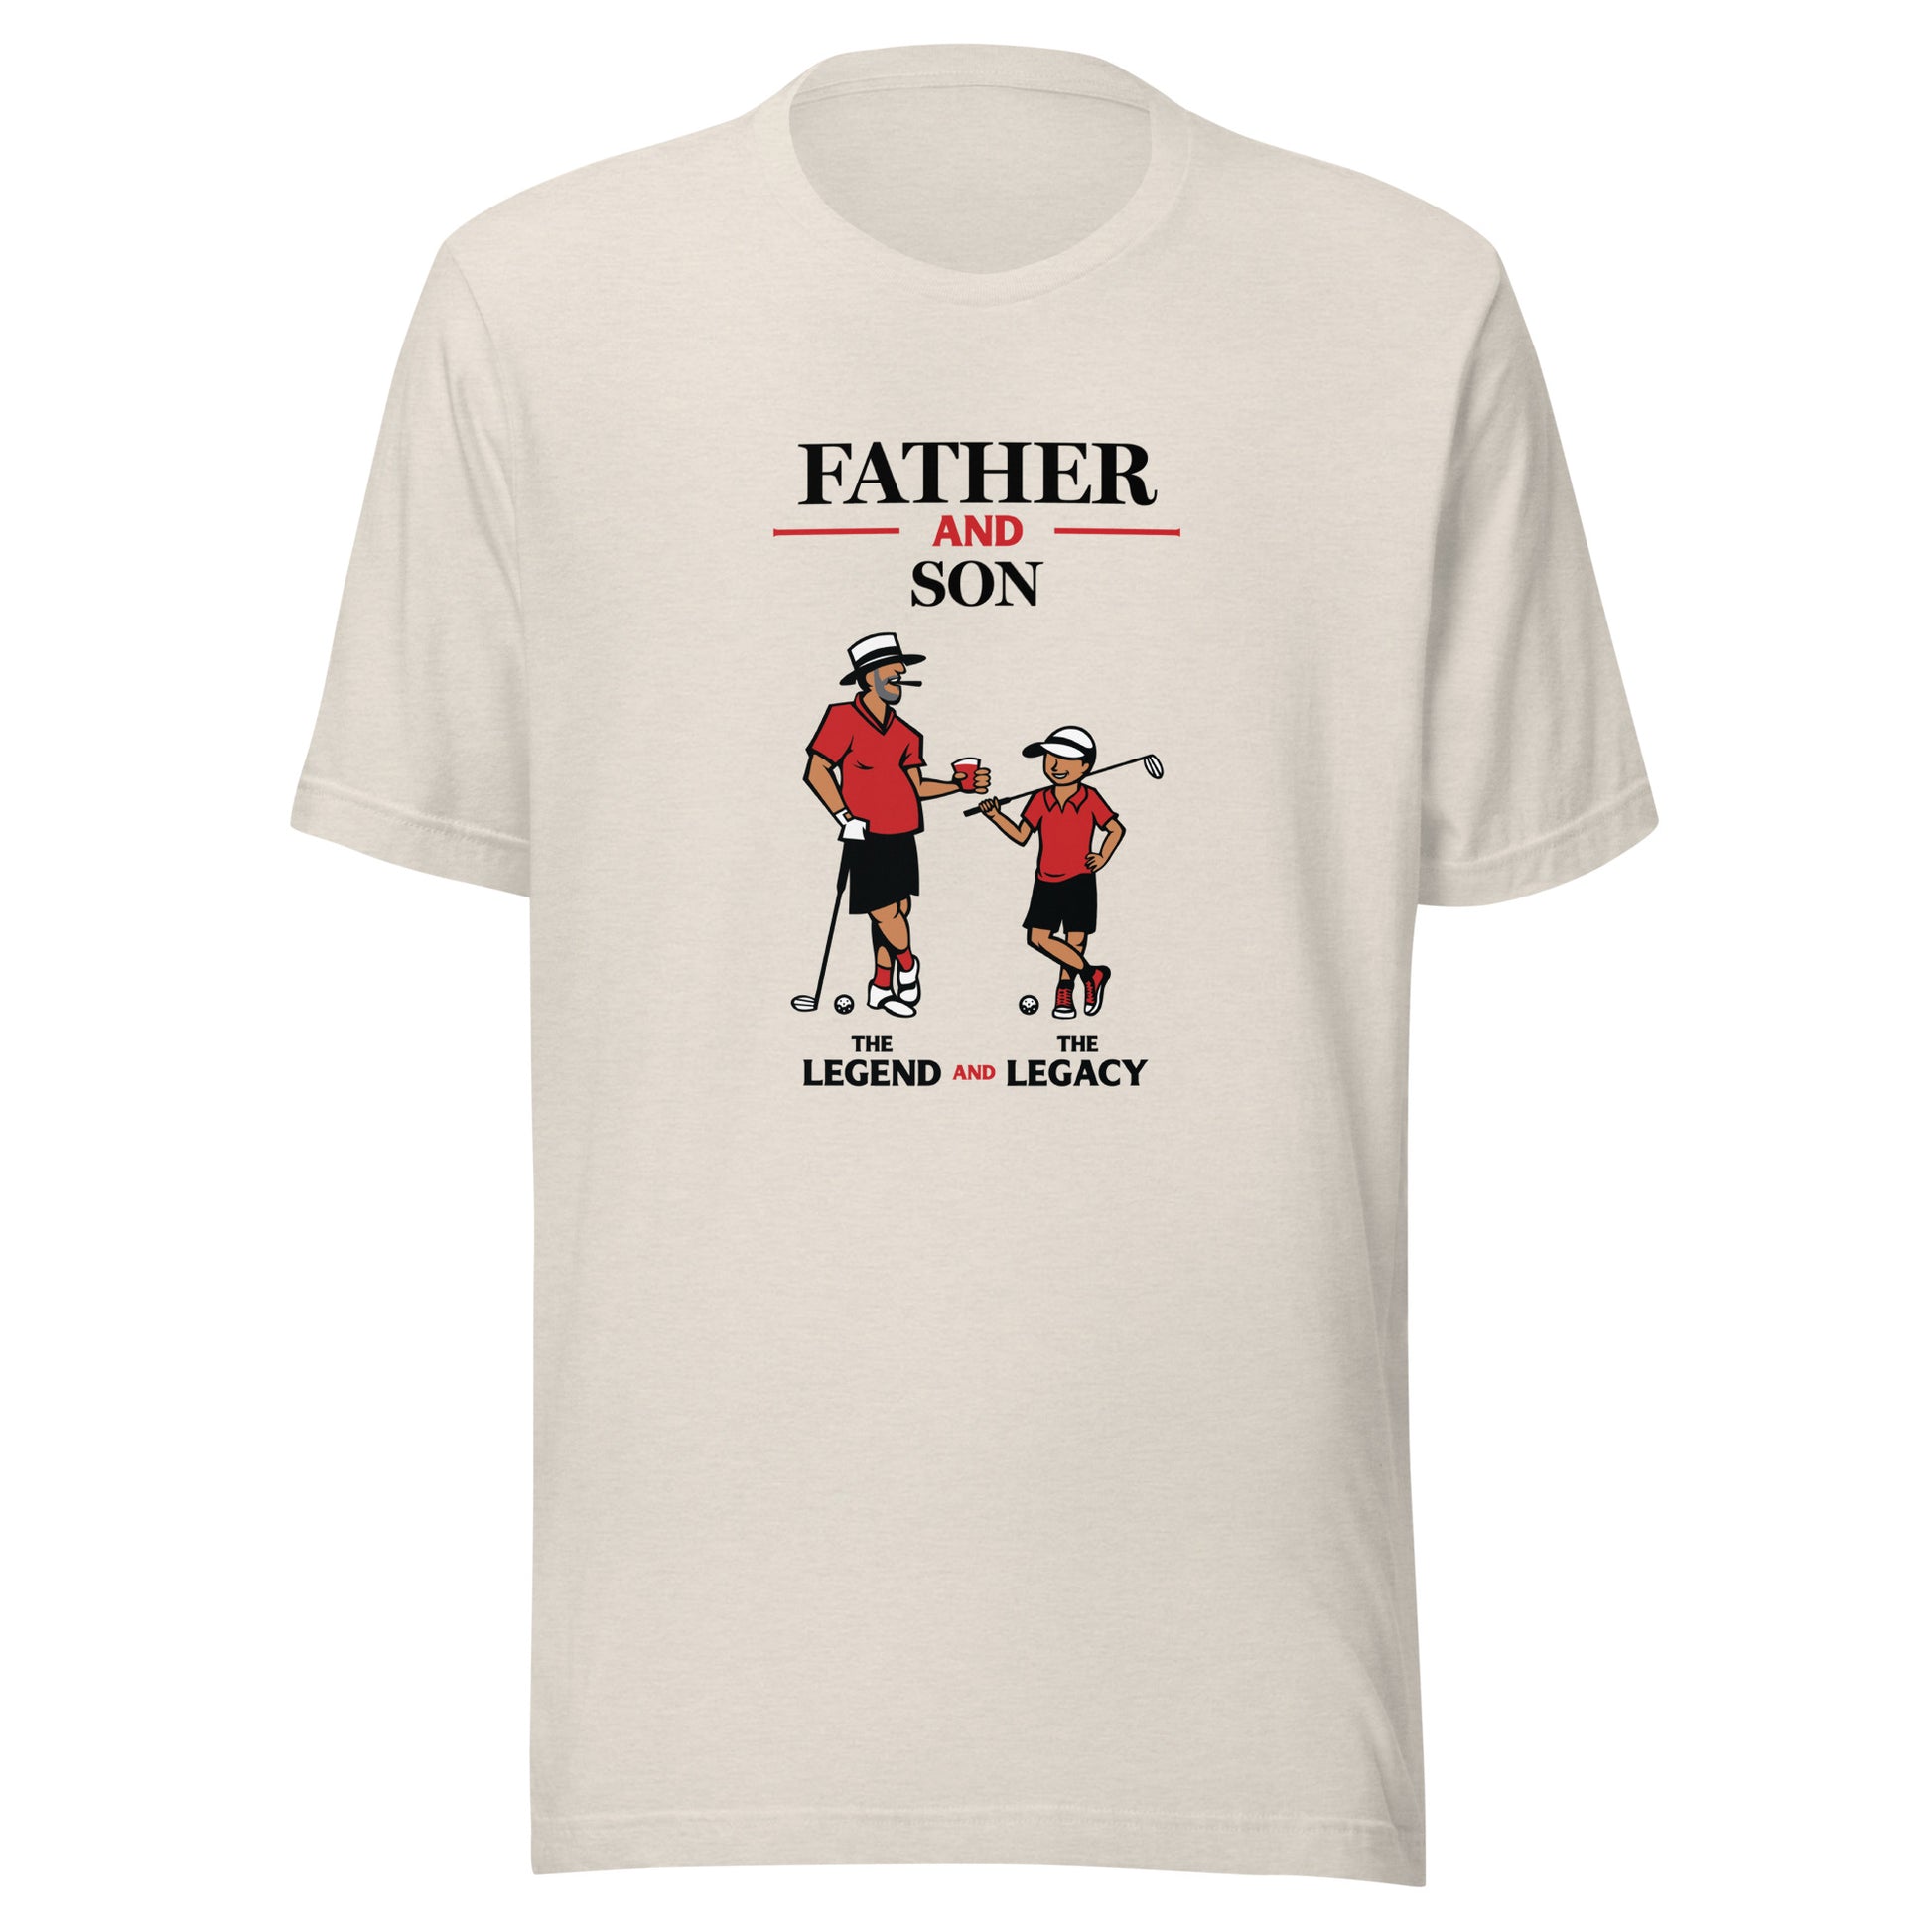 Adult Father/Son Legends t-shirt – OMG - Old Man Golf Apparel Co.